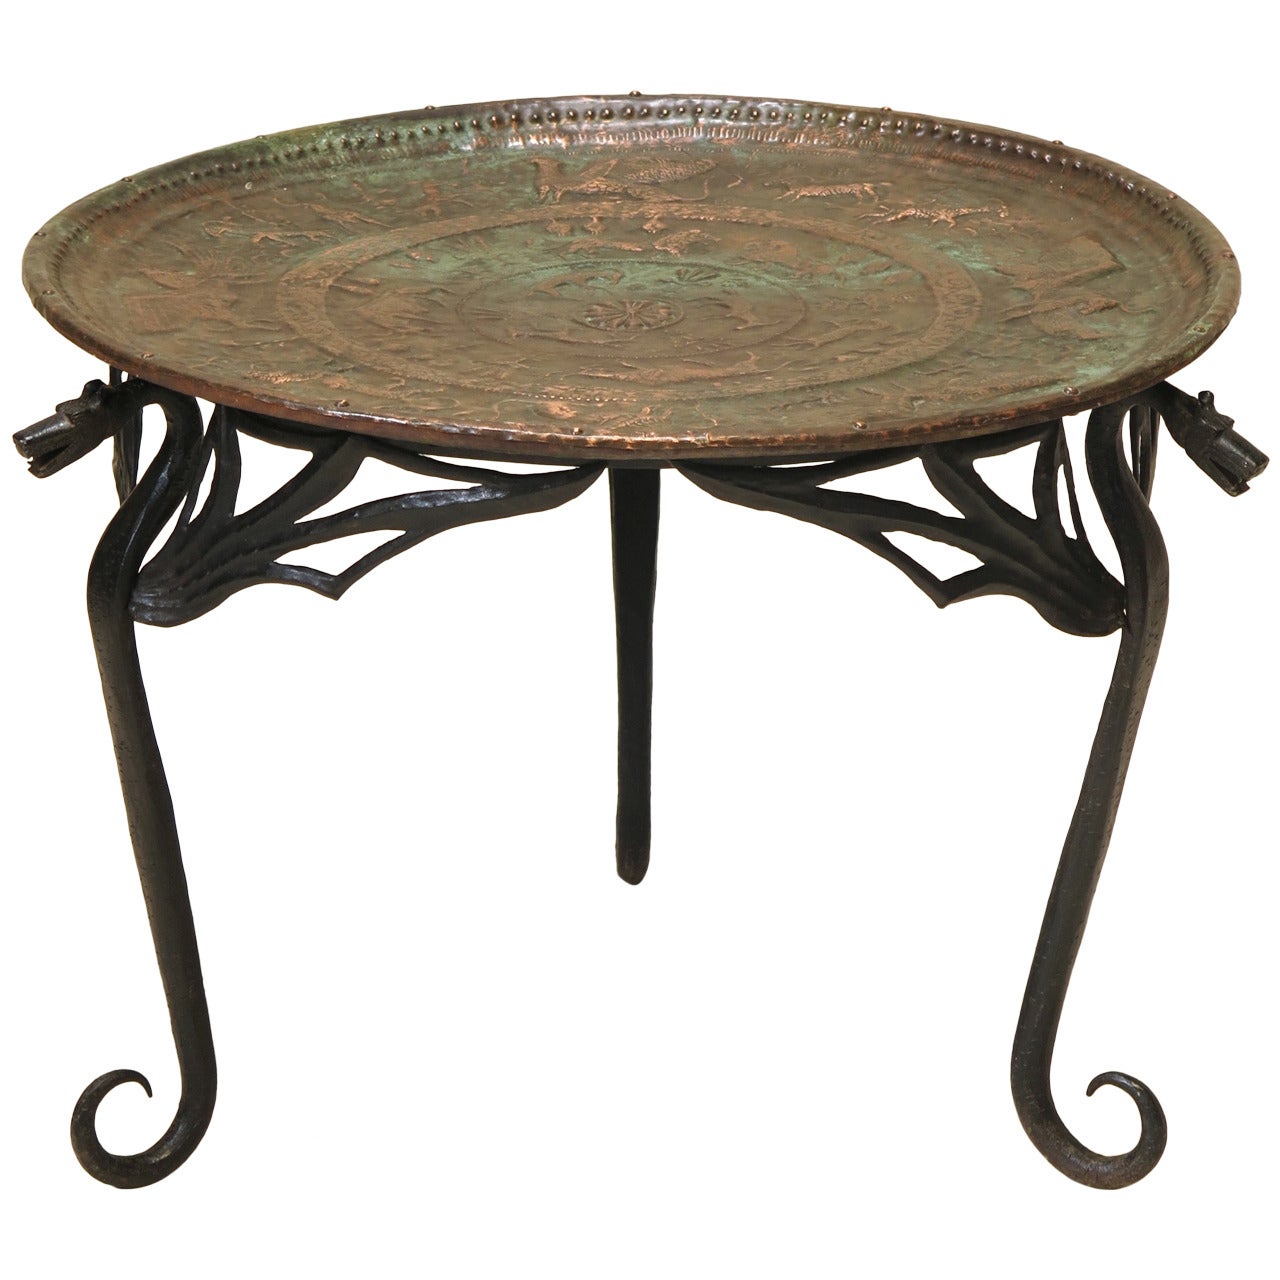 Wrought Iron "Dragon" Coffee Table with Copper Top, France, Early 1900s